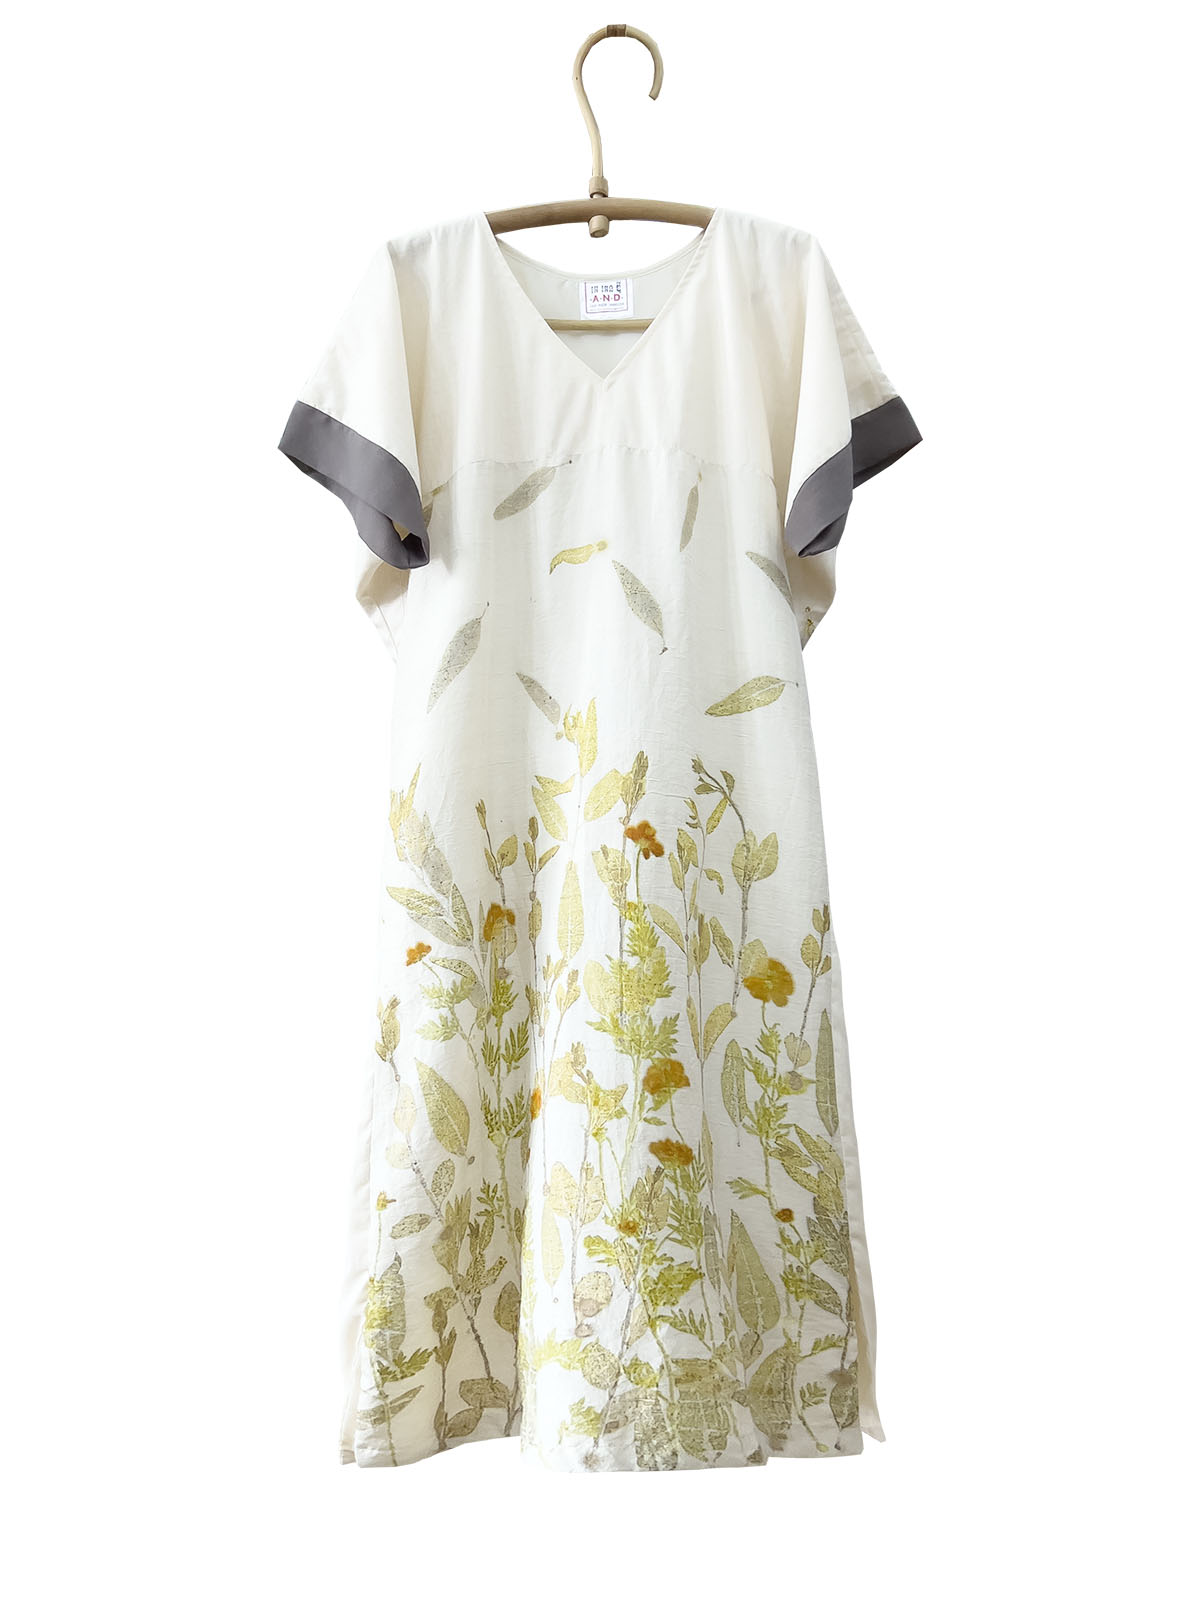 Silk Dress with Flower Print - (h)A.N.D. - Handmade in Cambodia - Mitzie Mee Shop